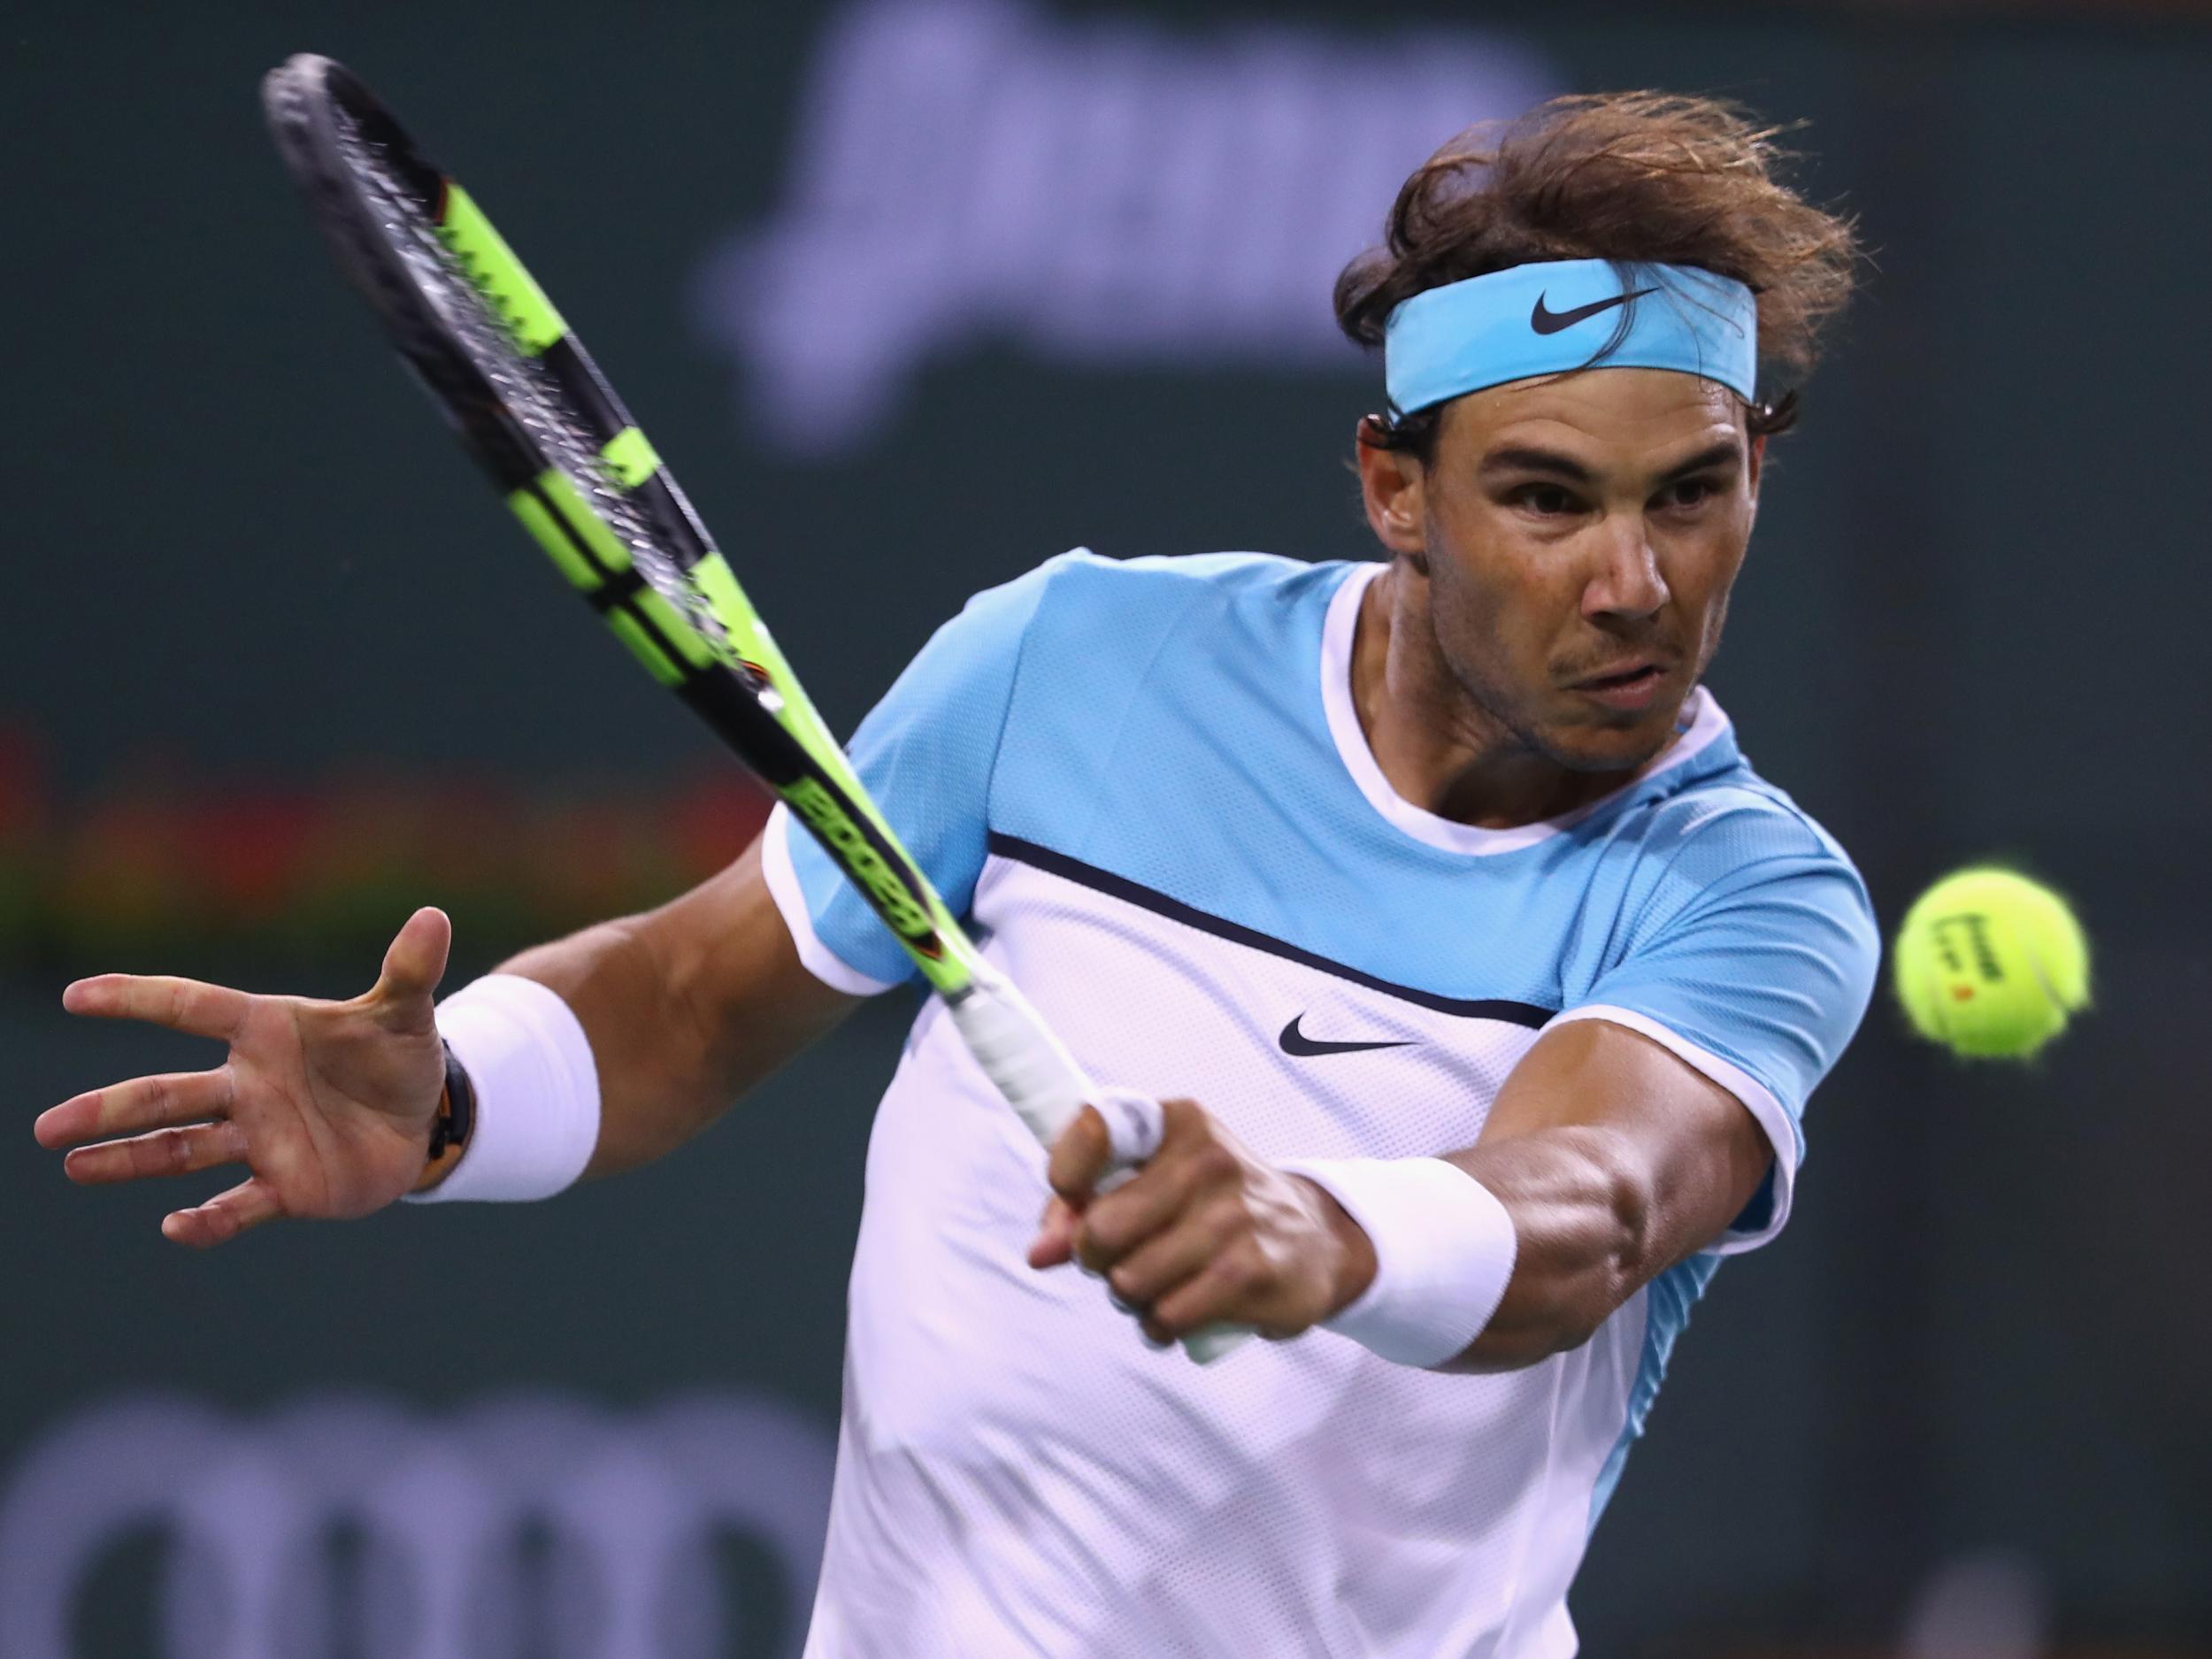 Left-handed Nadal is the current tennis world number one